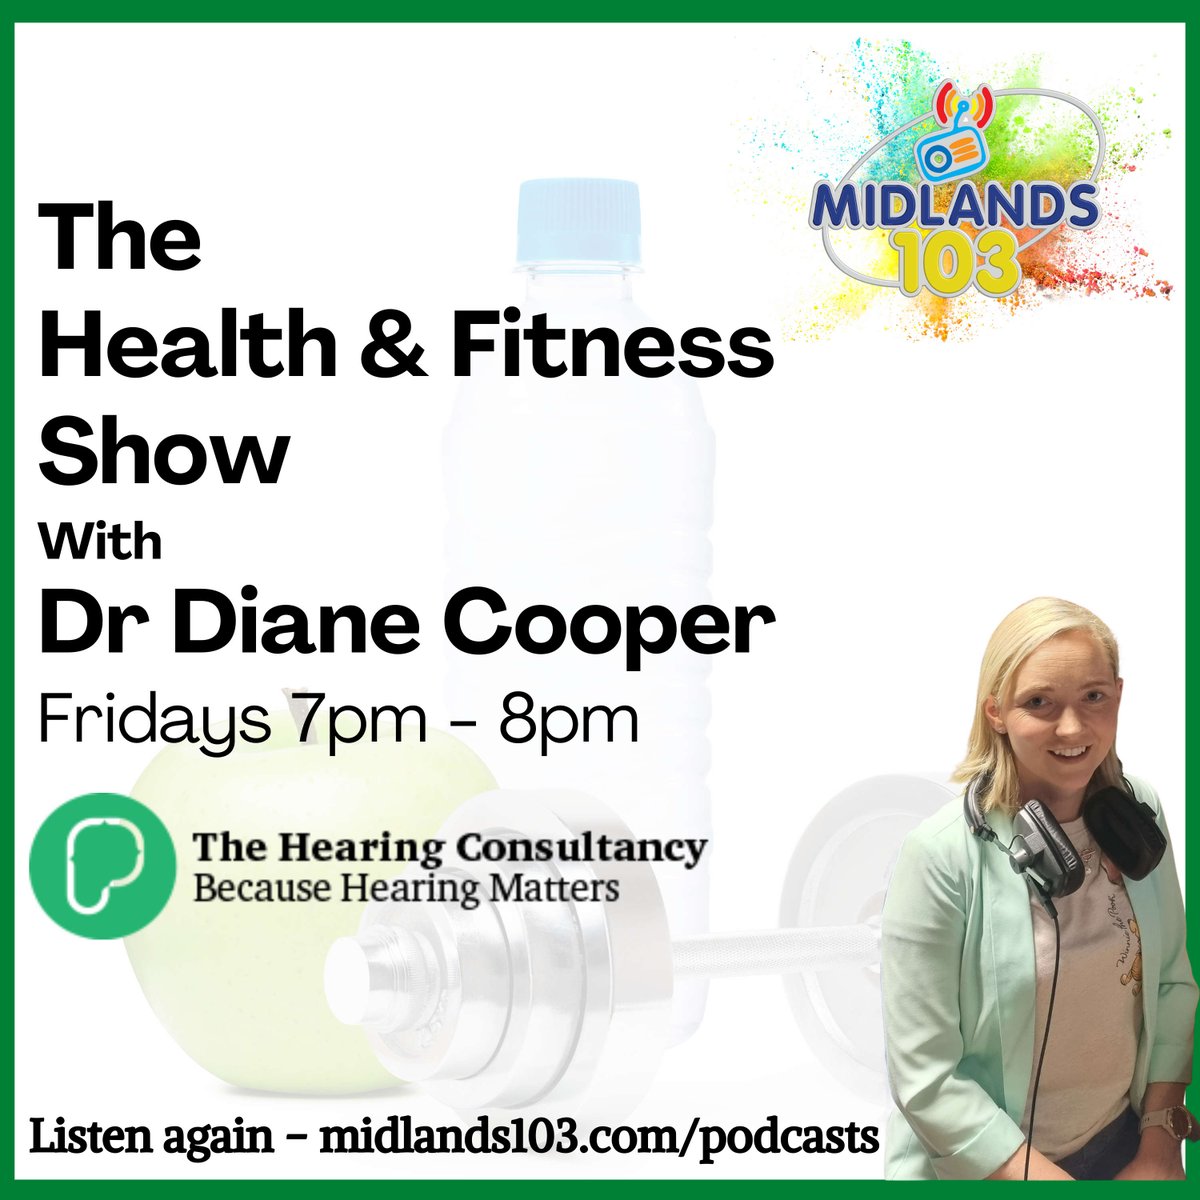 Had a wonderful time chatting to @DrDianeCooper about my #injuryprevention research in @LadiesFootball on this week's Health & Fitness Show, which aired last night @ 7pm on @Midlands103 
 
You can give it a listen here (or on apple/google podcasts):
open.spotify.com/episode/3I6bSy…

1/2